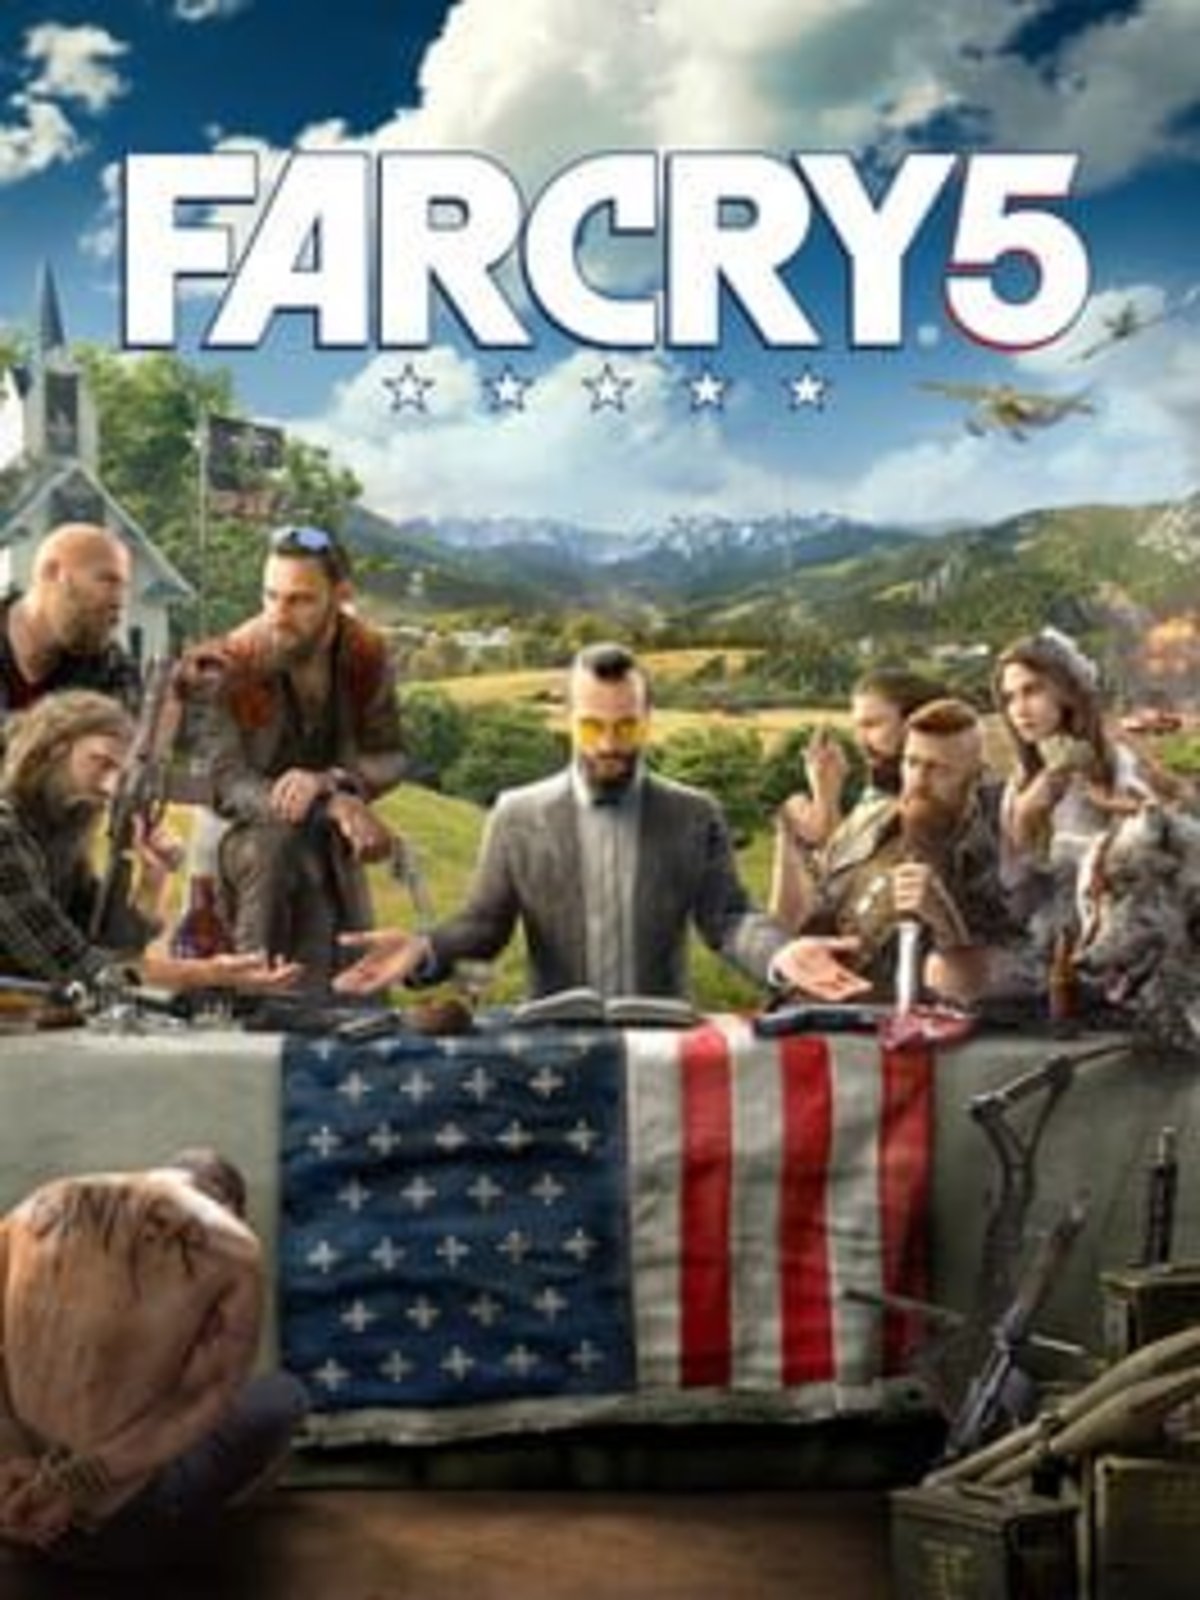 Far Cry 5 is free to play on all platforms for a limited time